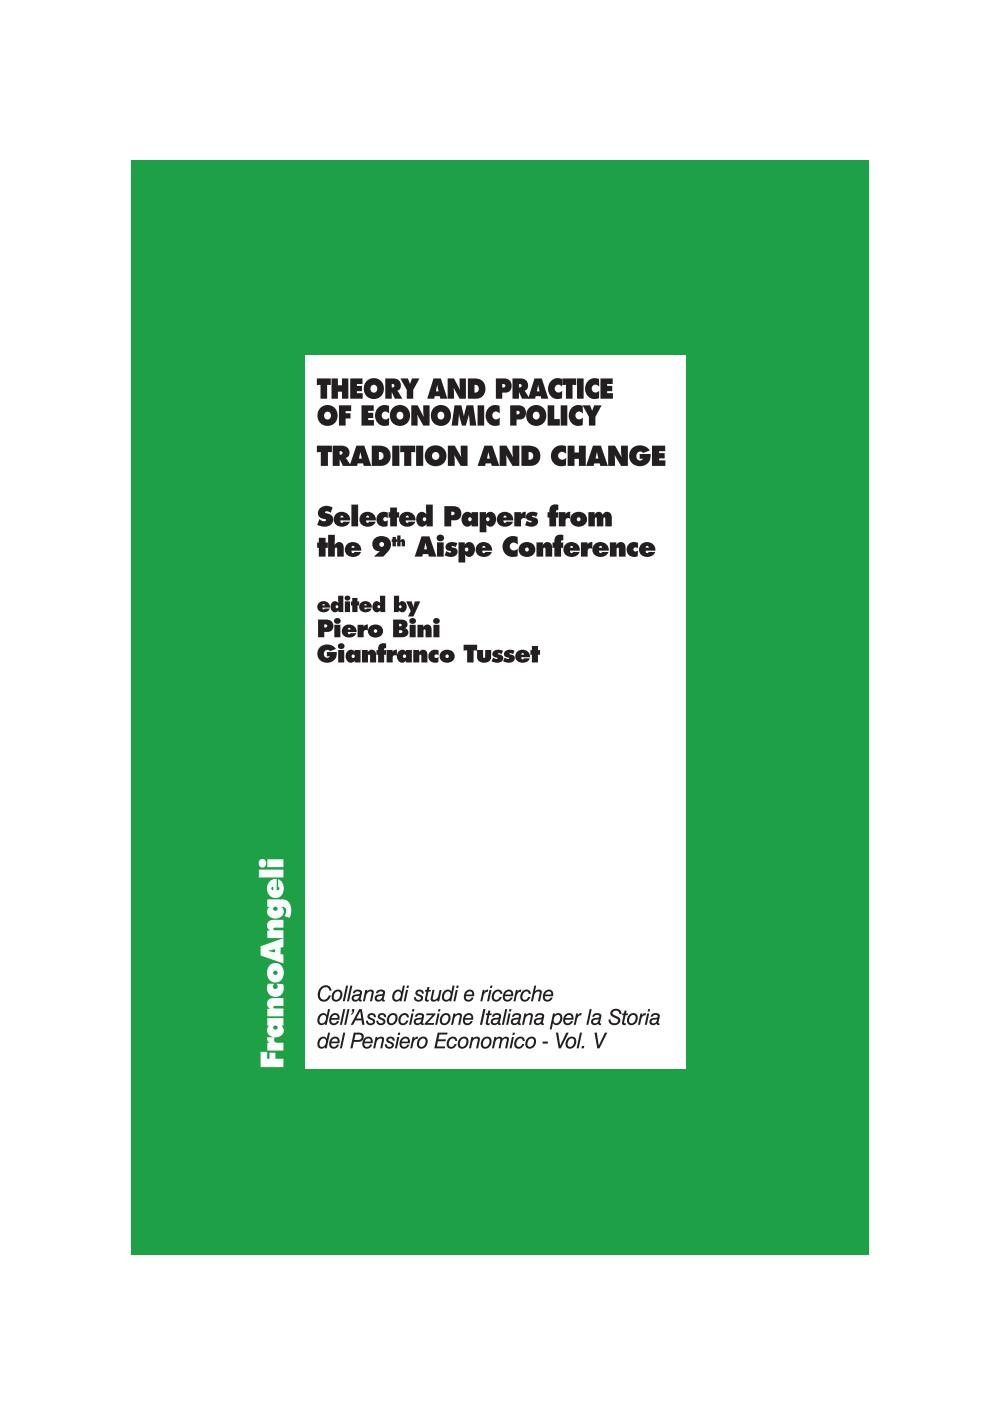 Theory and practice of economic policy. Tradition and change. Selected Papers from the 9th Aispe Conference - Librerie.coop